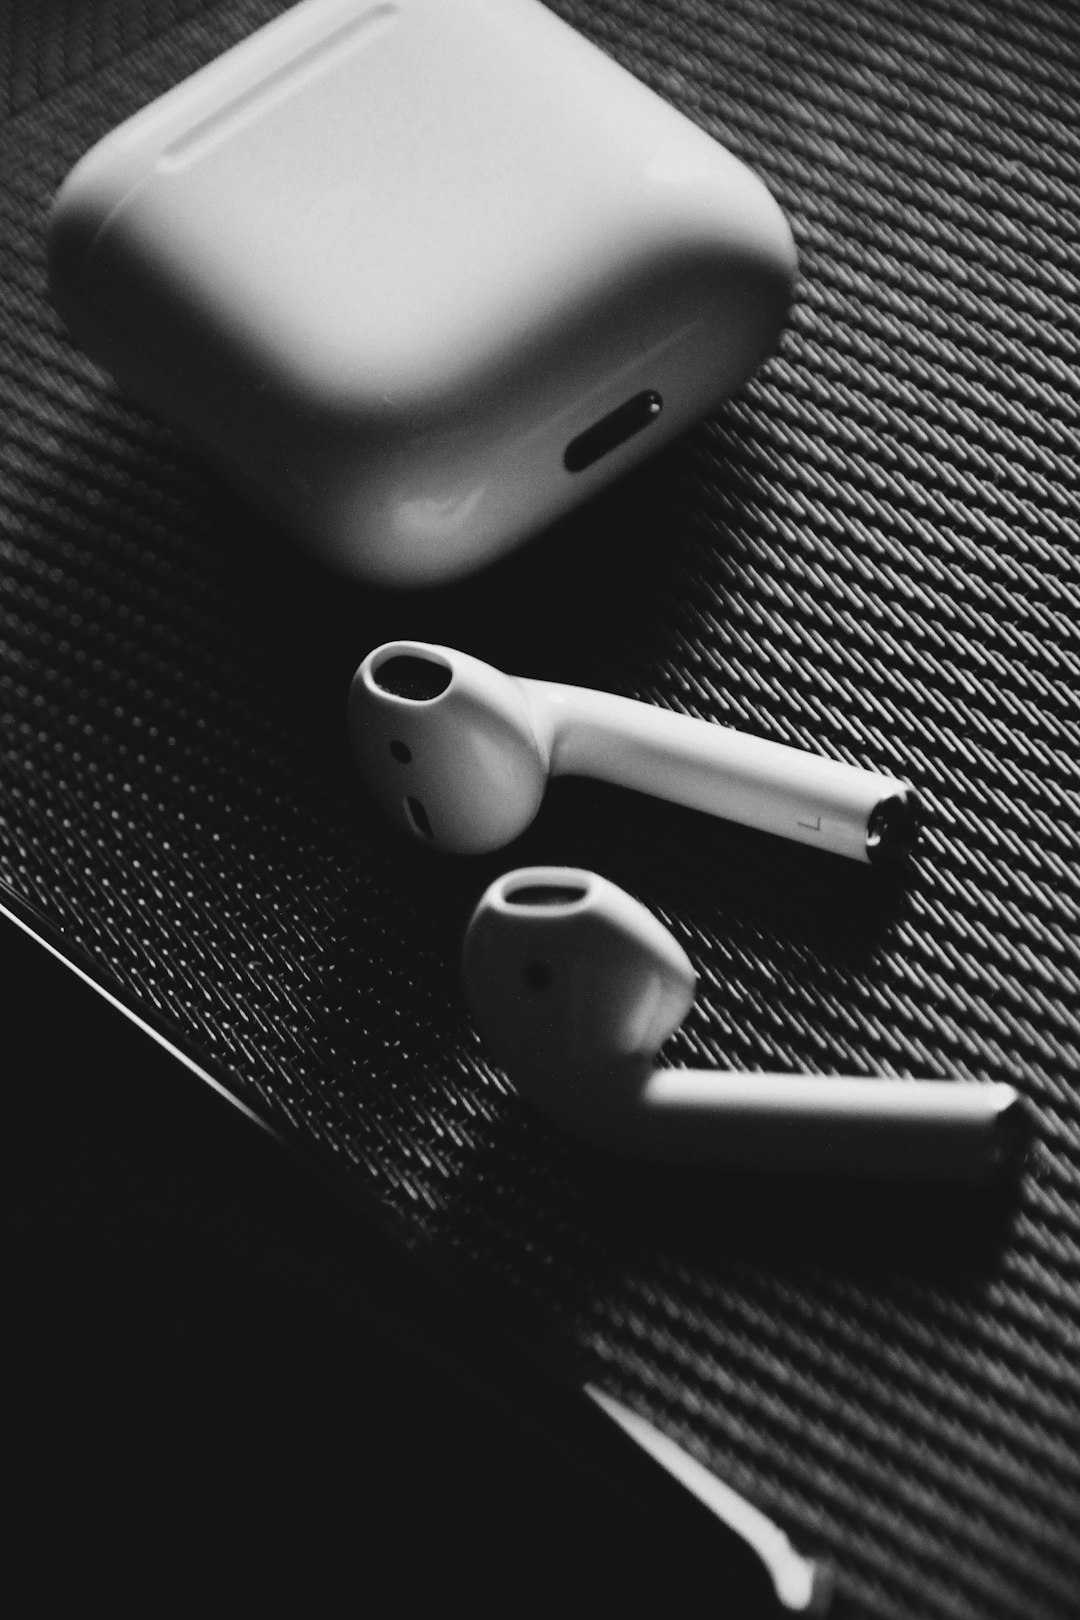 Apple AirPods with charging case on surface